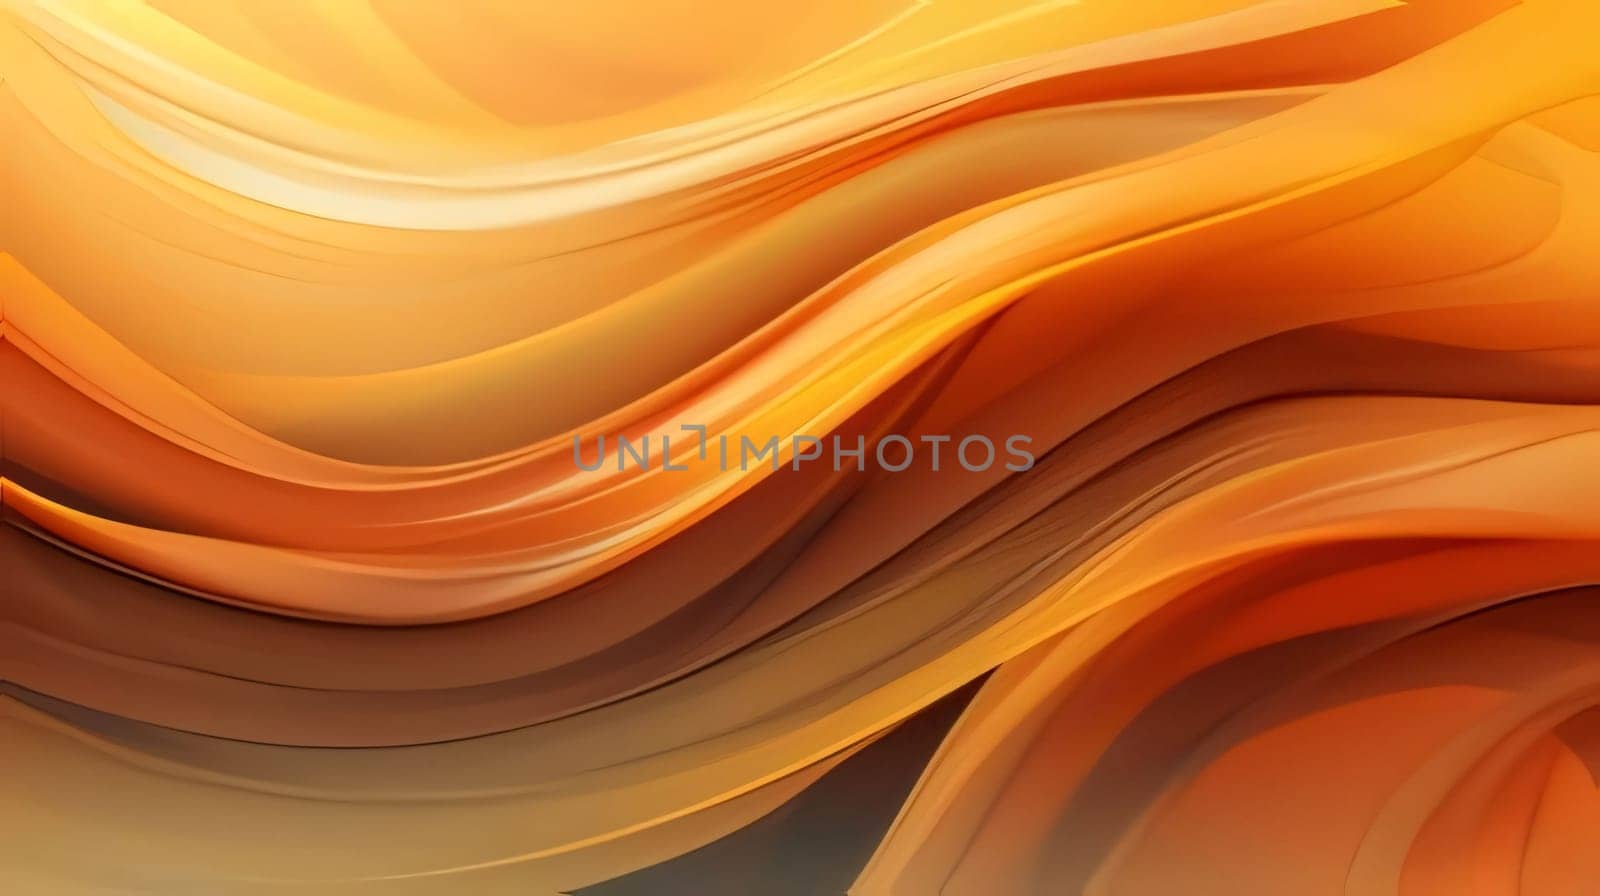 Abstract background design: abstract orange background with smooth lines in it. 3d render